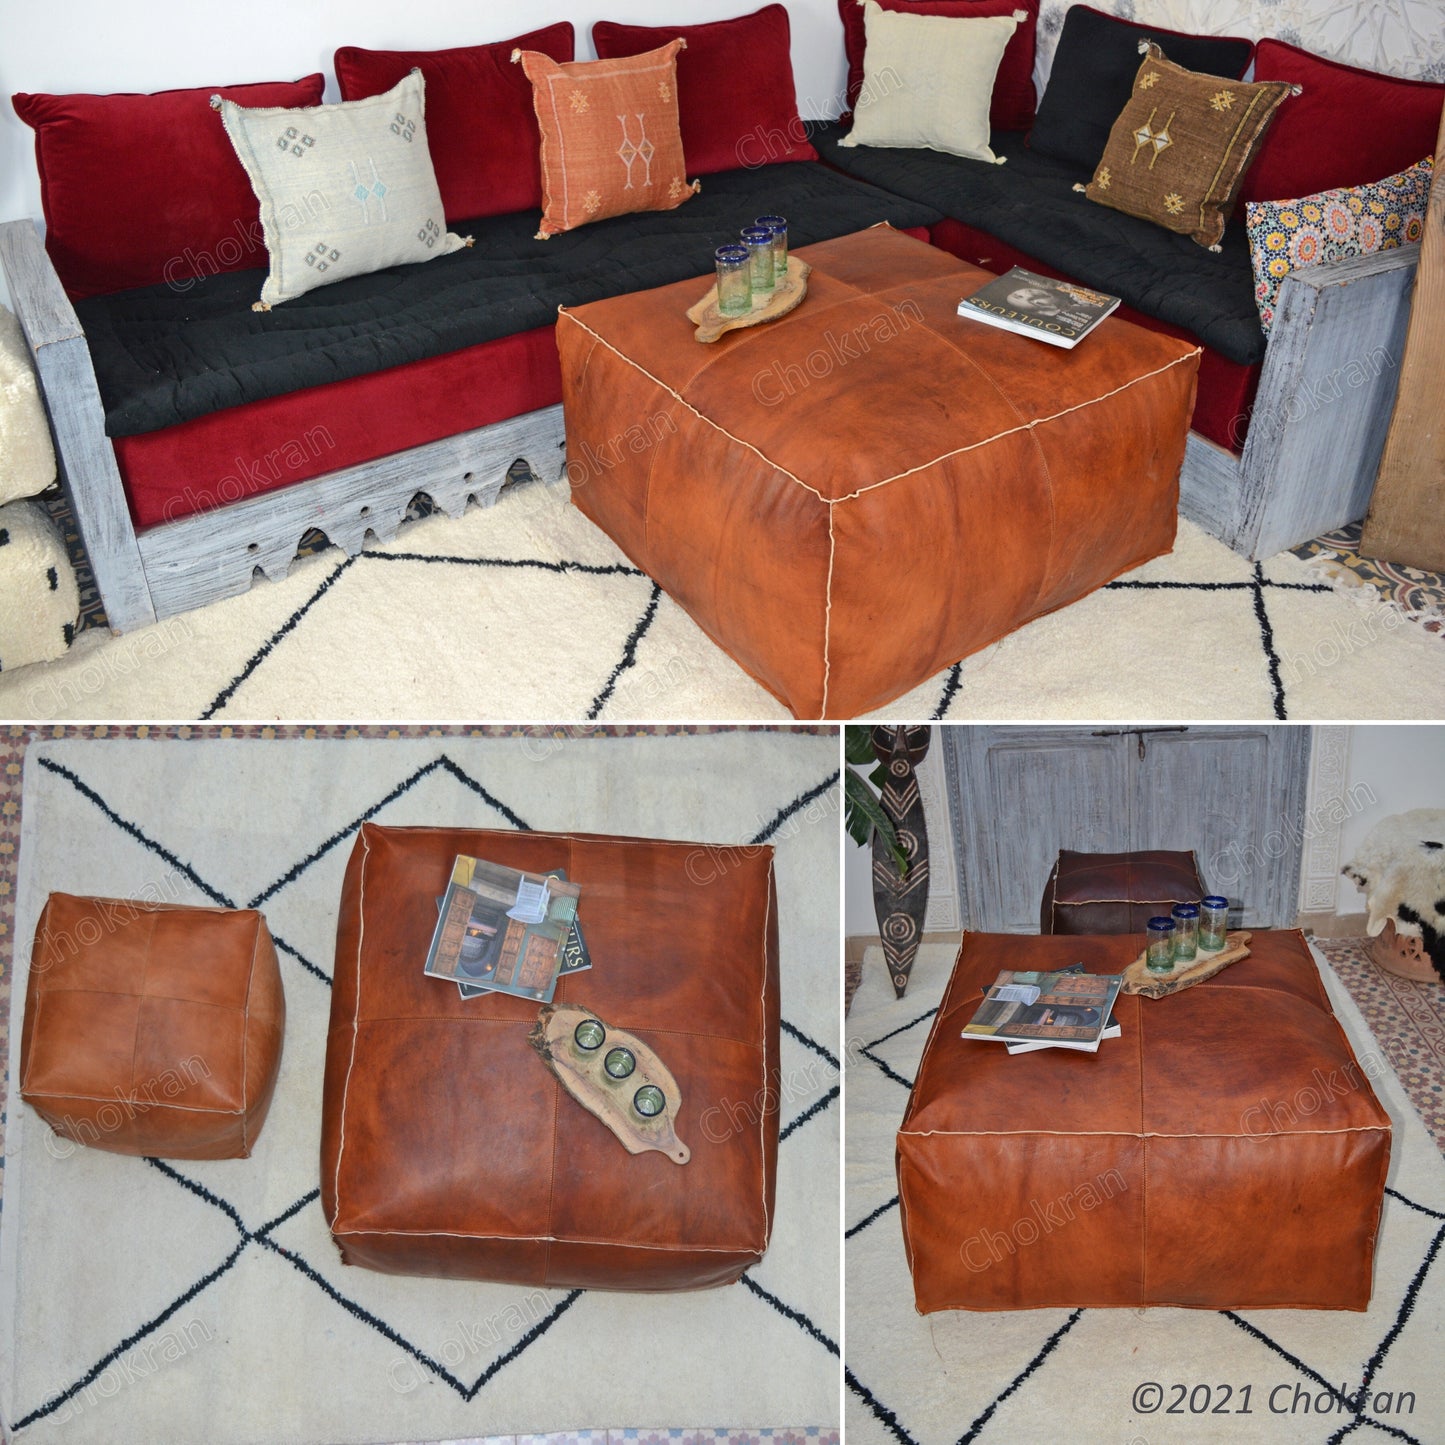 Large Square Pouf, Square leather ottoman, Large leather pouf, Moroccan genuine leather footstool-UNSTUFFED